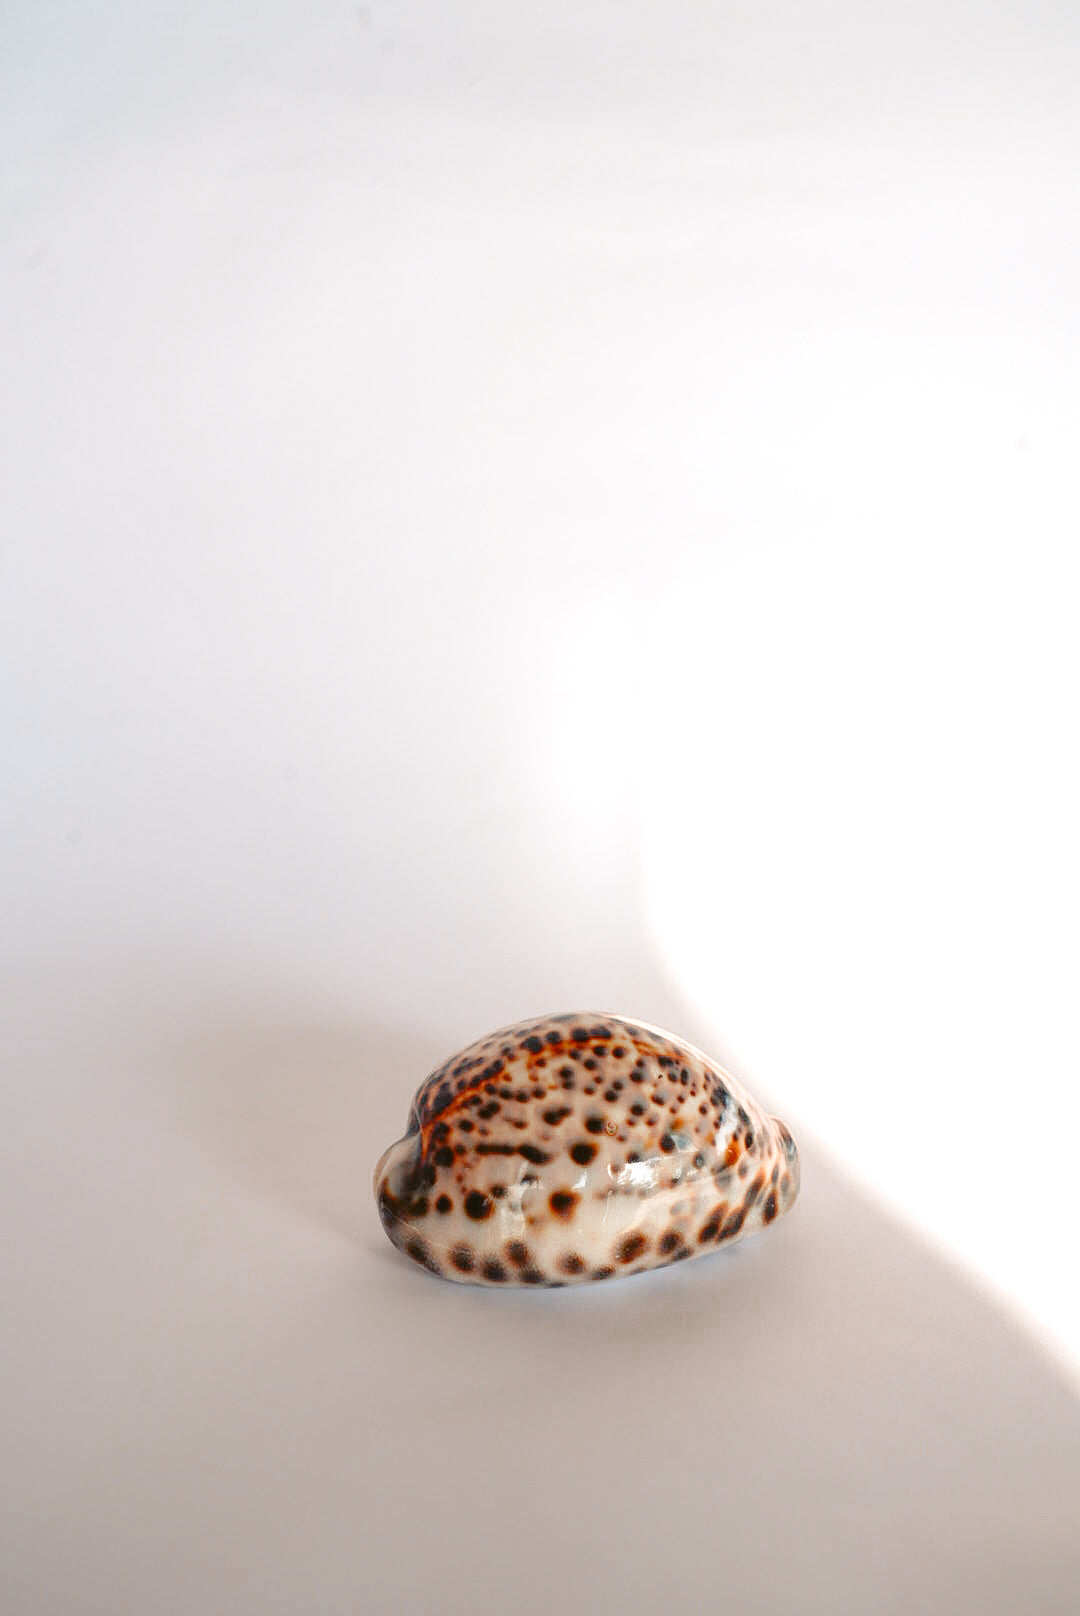 THE TORT COWRIE SHELL